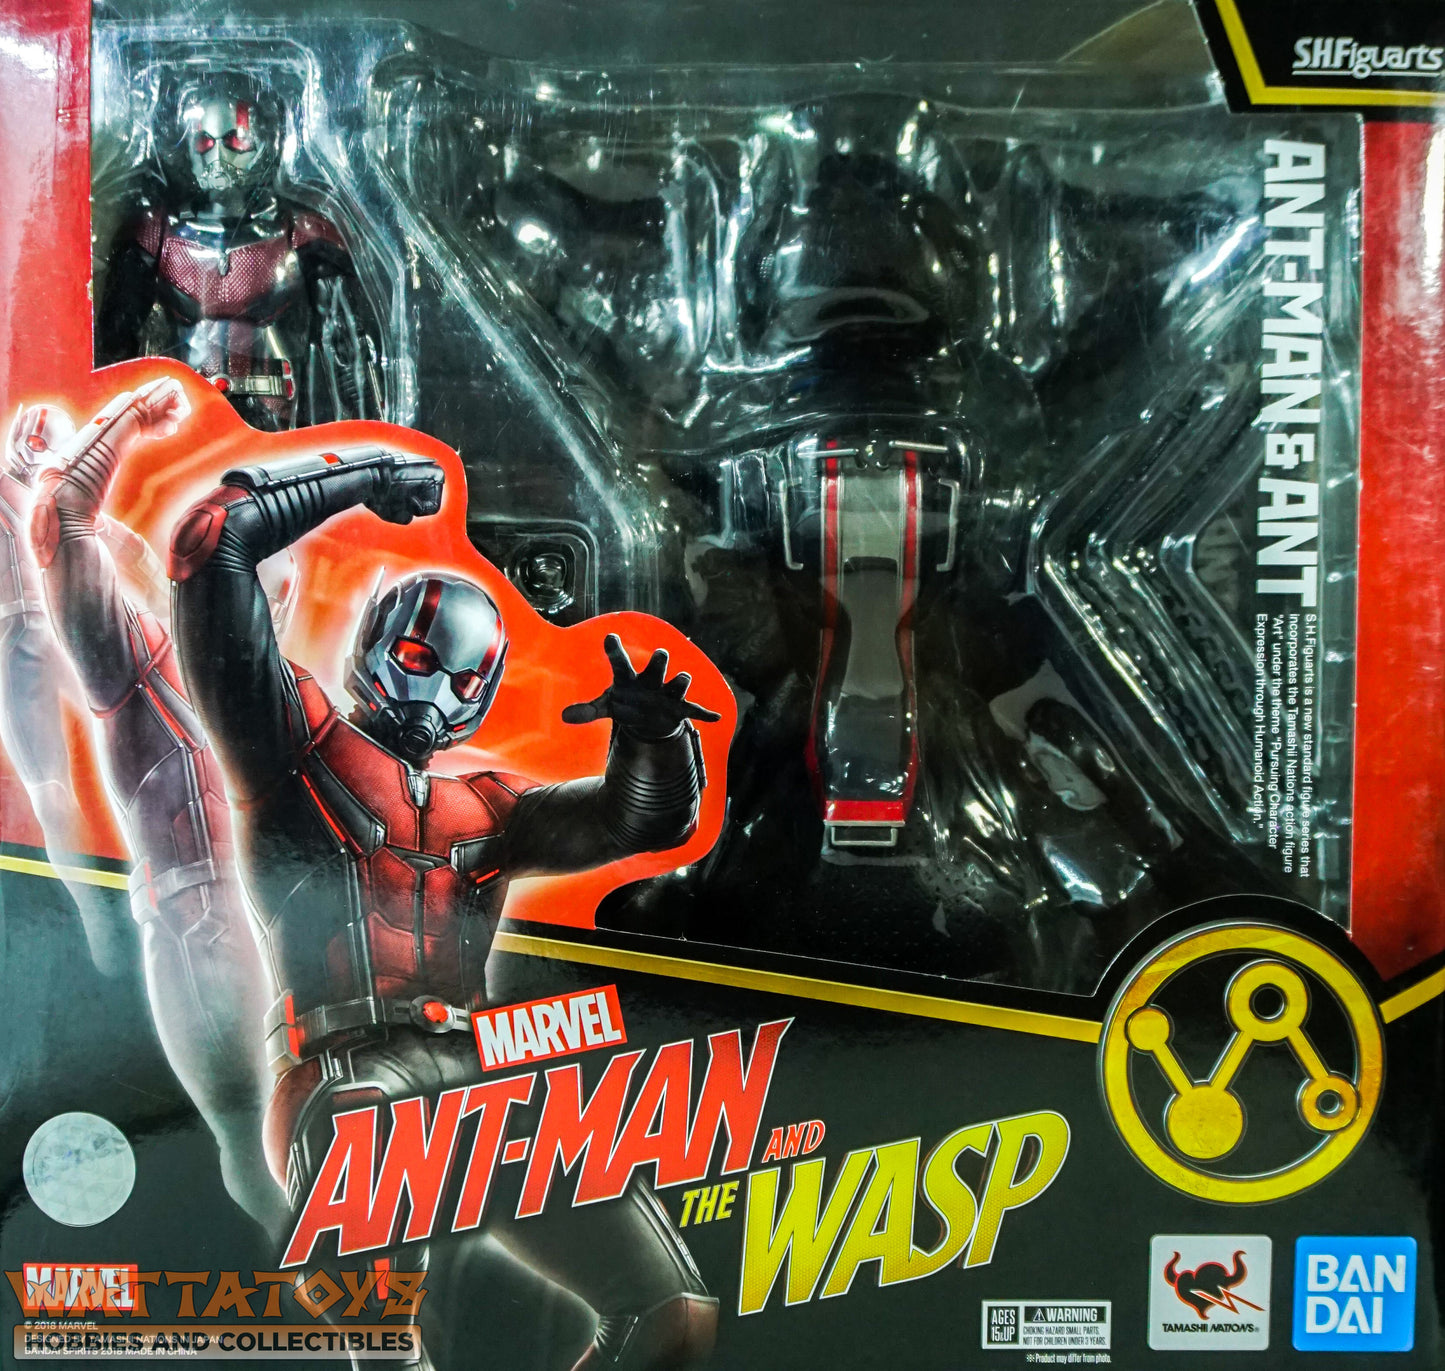 S.H.Figuarts Ant-man and the Wasp